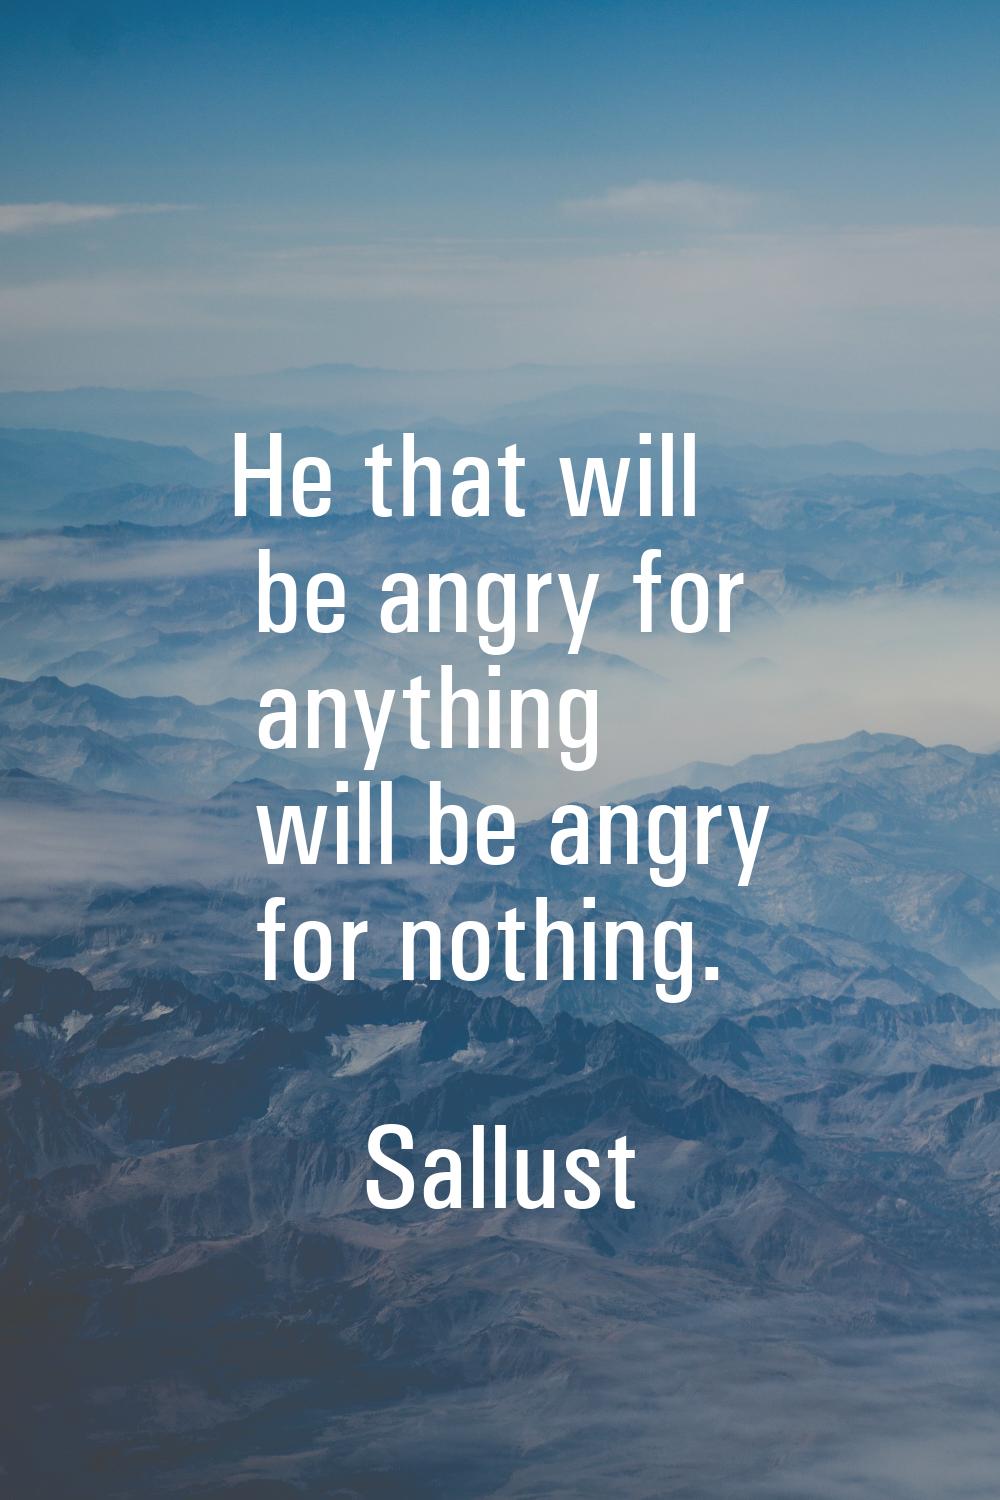 He that will be angry for anything will be angry for nothing.